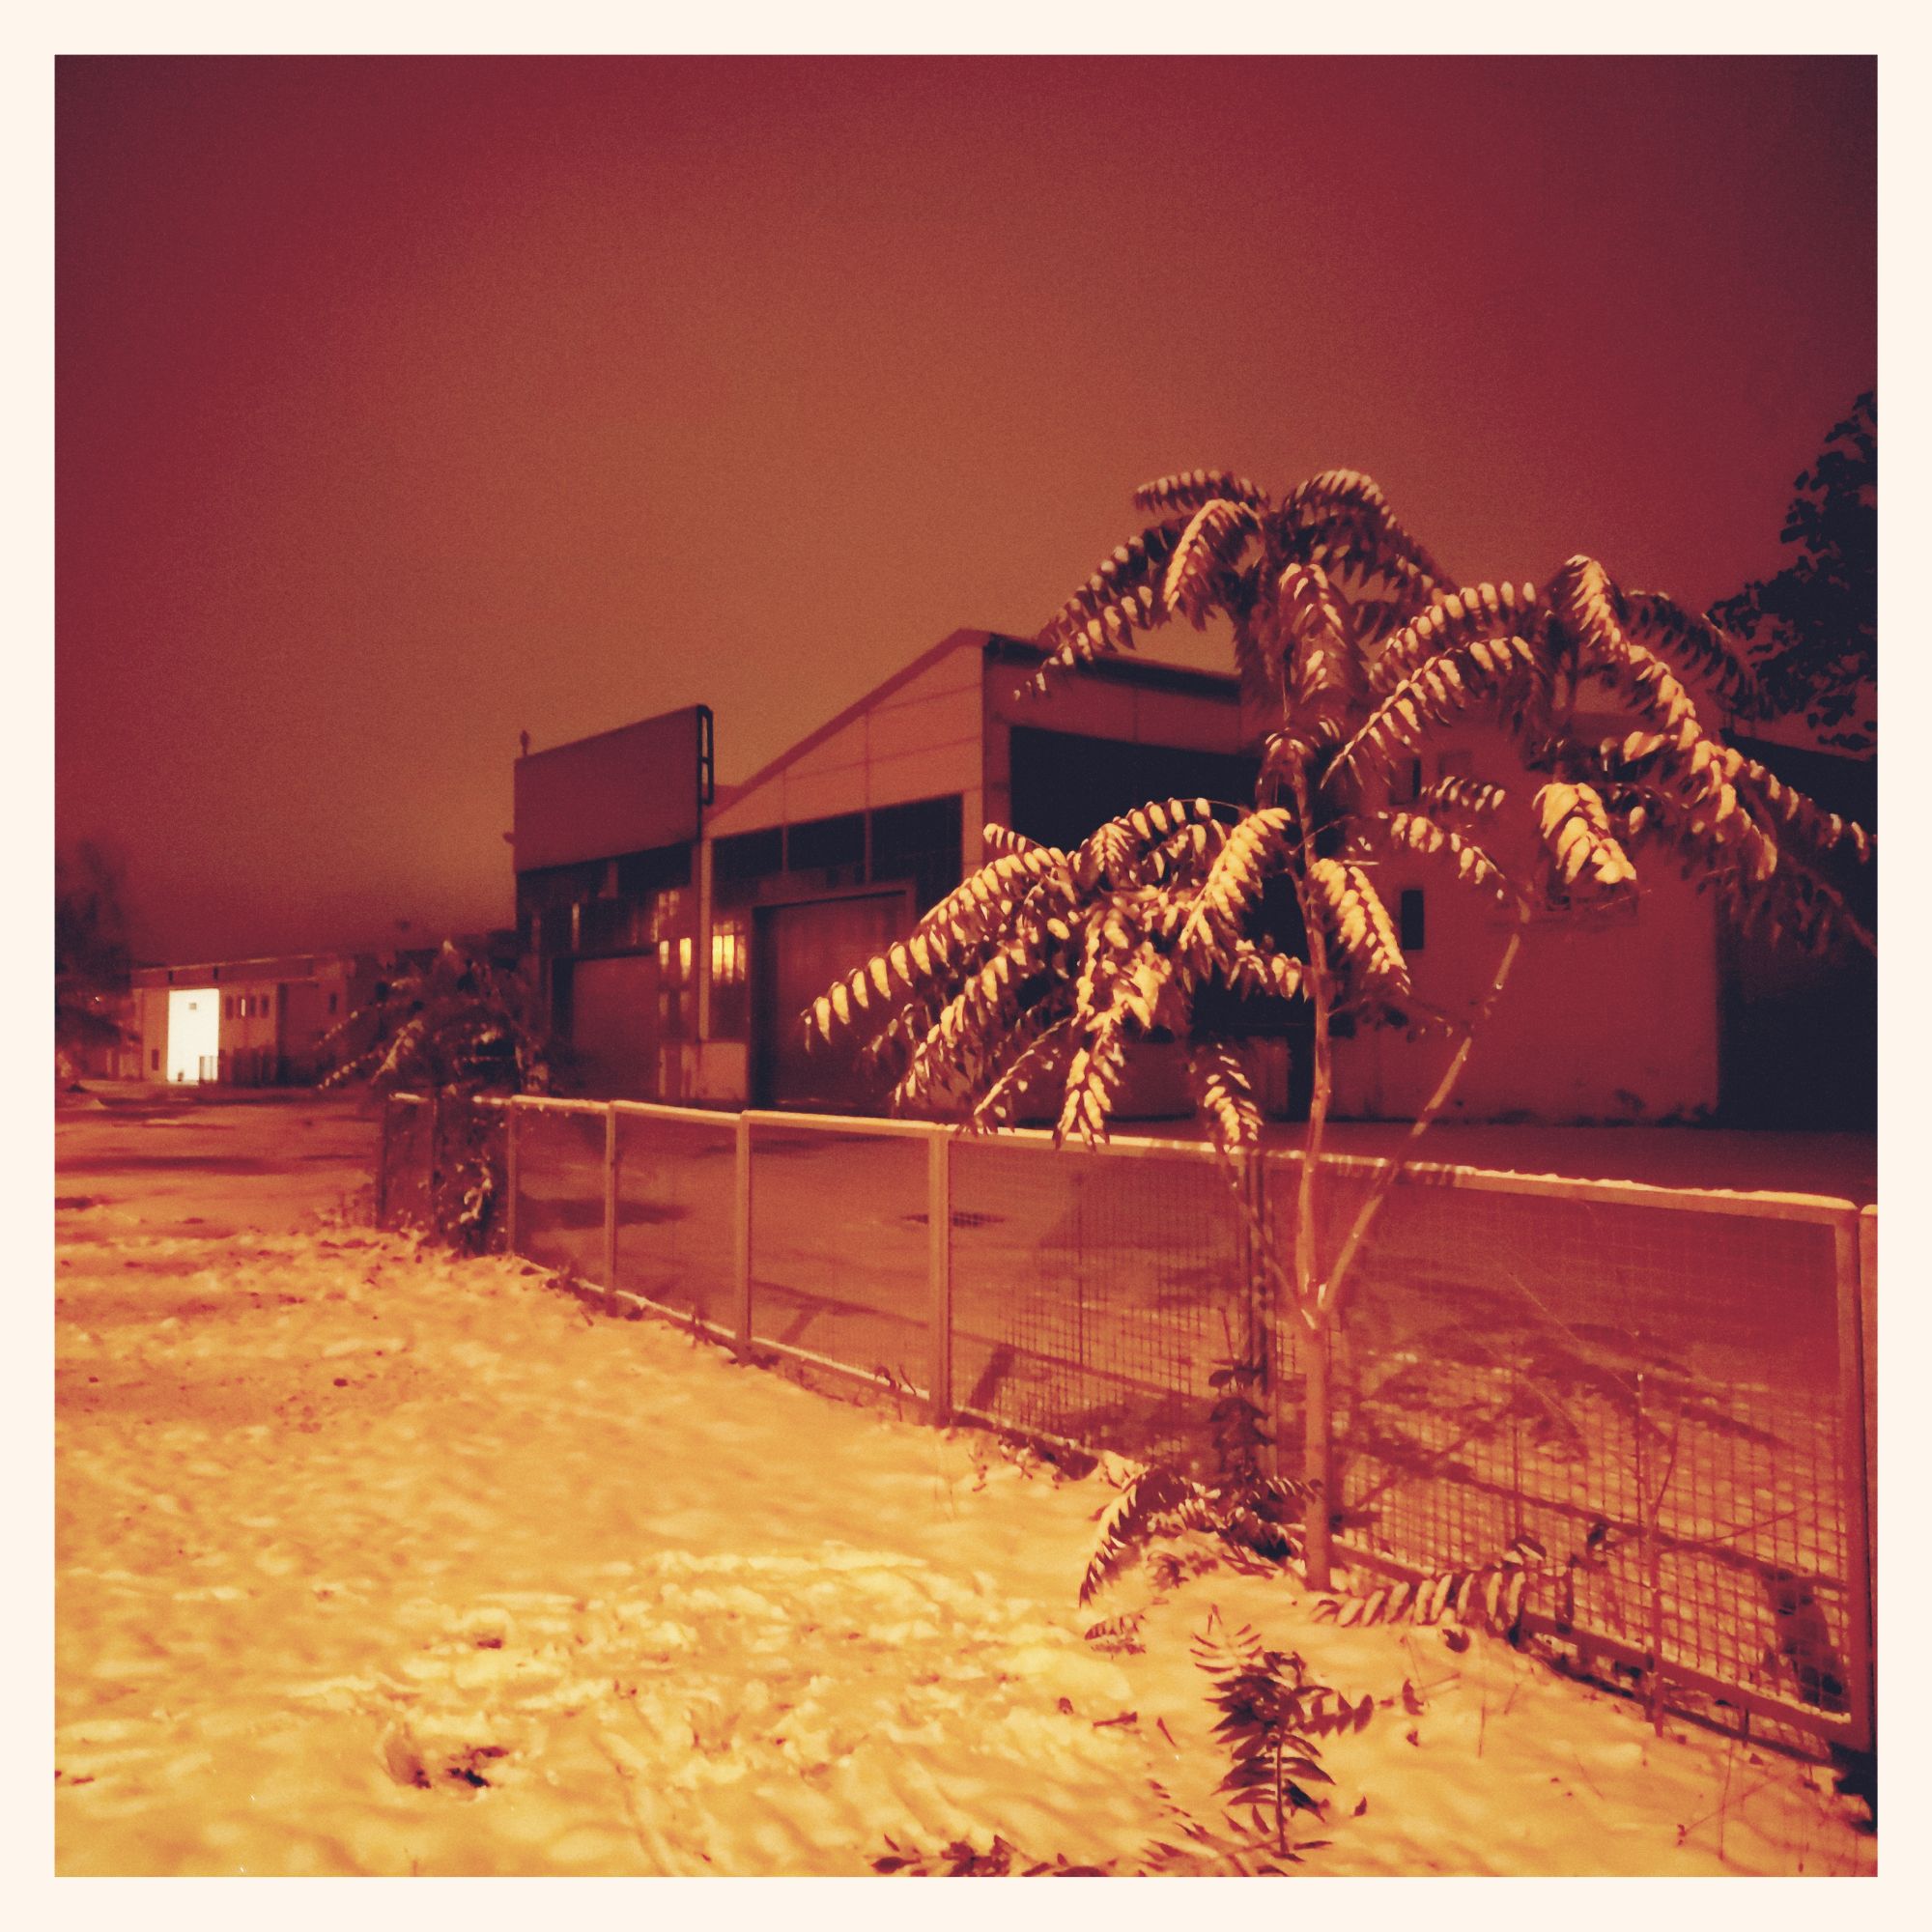 A silent business building behind a metal fence, and a snow-covered tree in front.